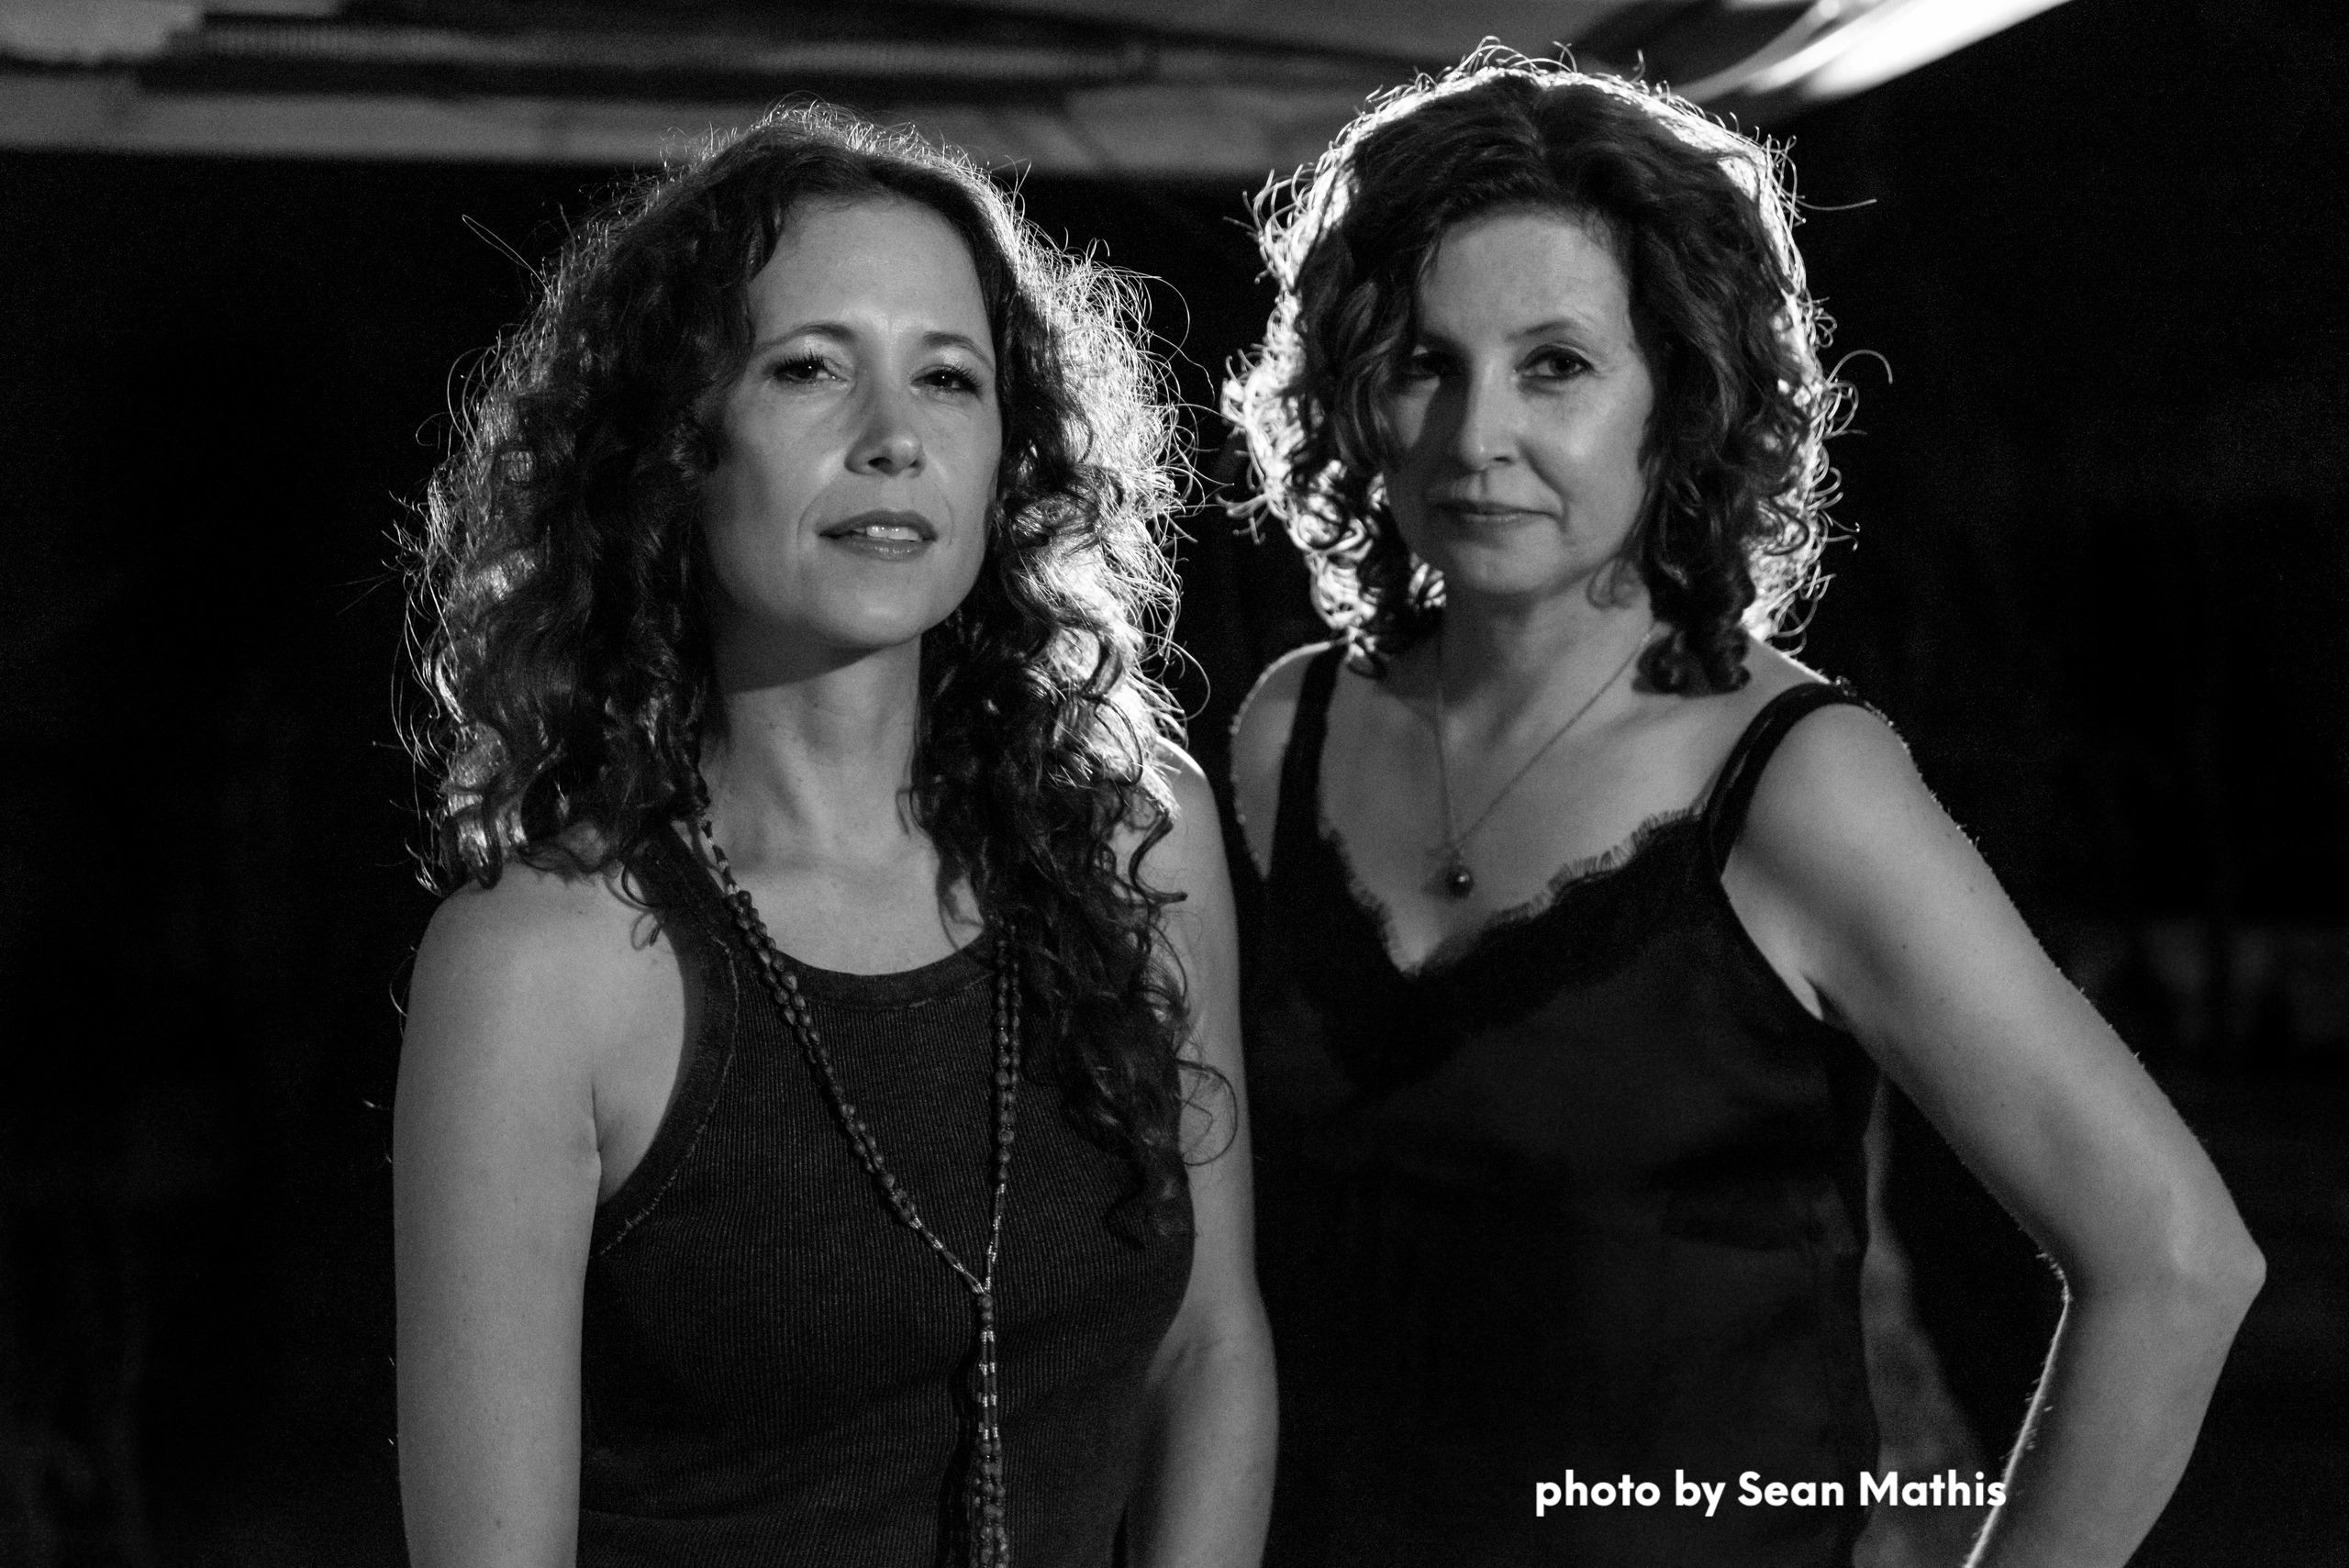 Sarah Lee Guthrie and Cathy Guthrie 
Photo by Sean Mathis.